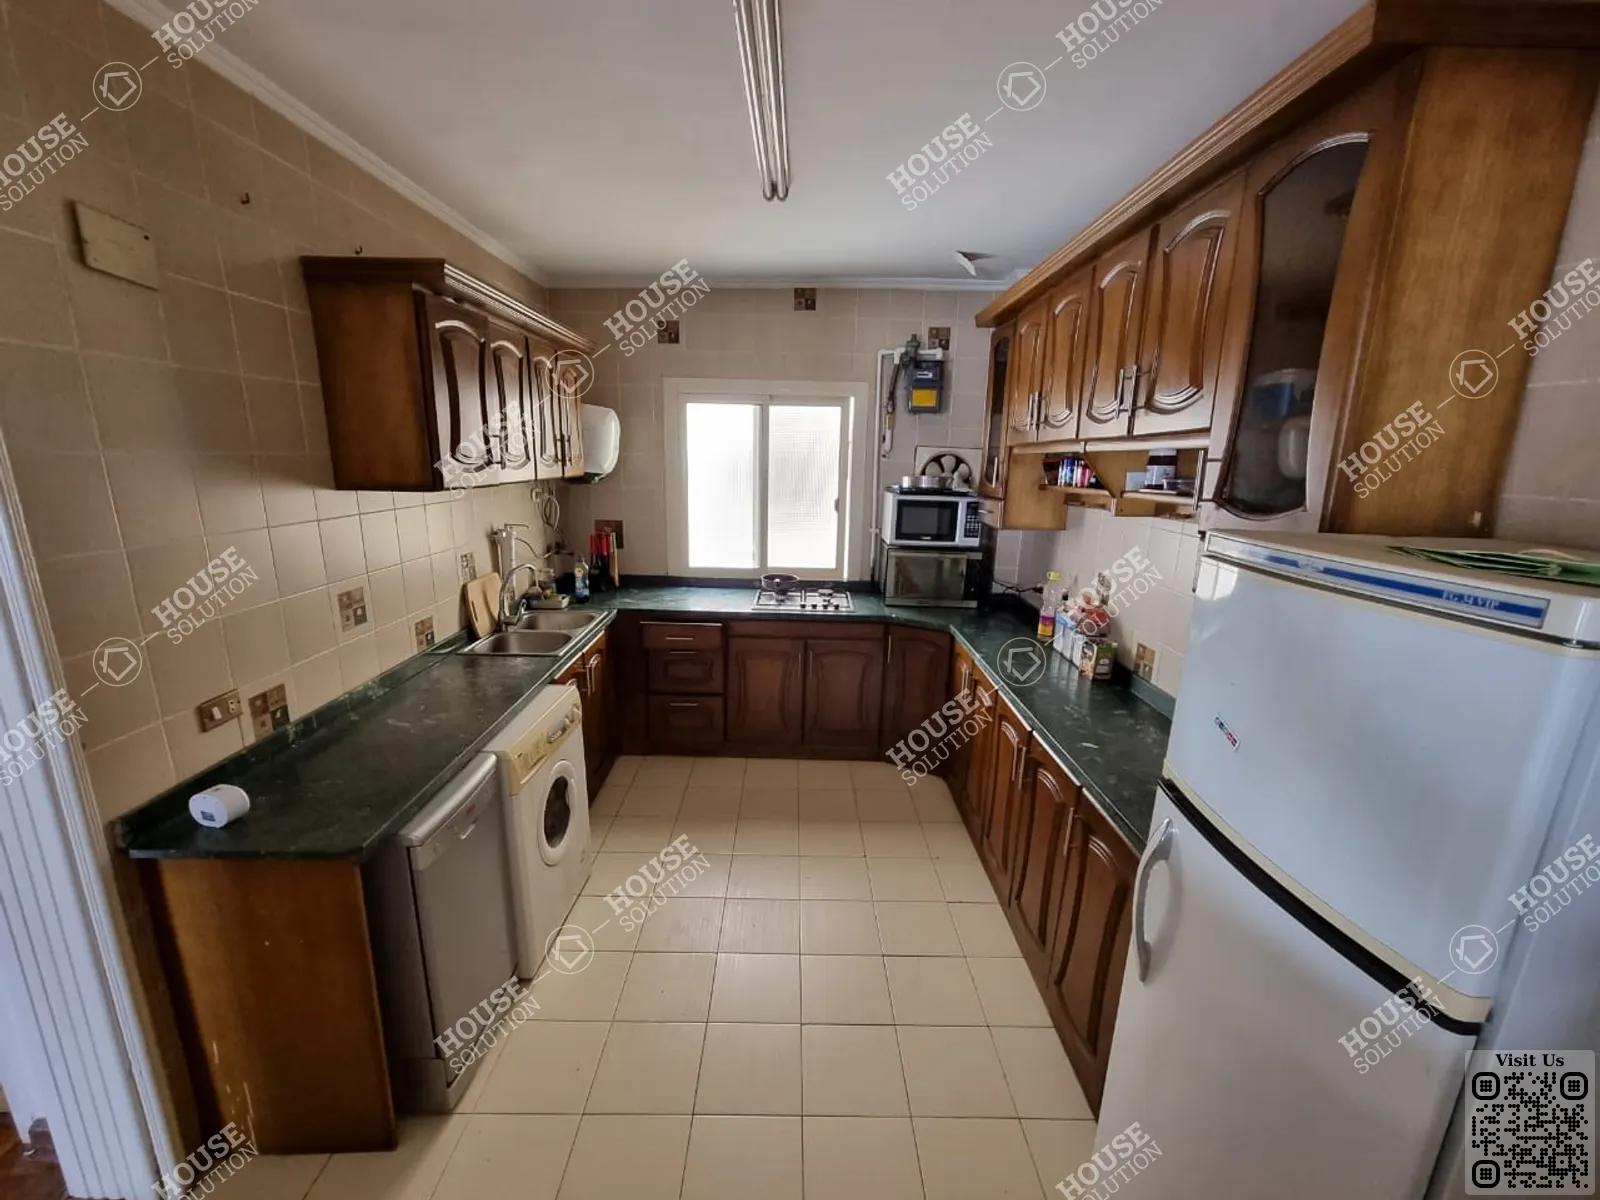 KITCHEN  @ Apartments For Rent In Maadi Maadi Sarayat Area: 140 m² consists of 2 Bedrooms 2 Bathrooms Furnished 5 stars #5416-1